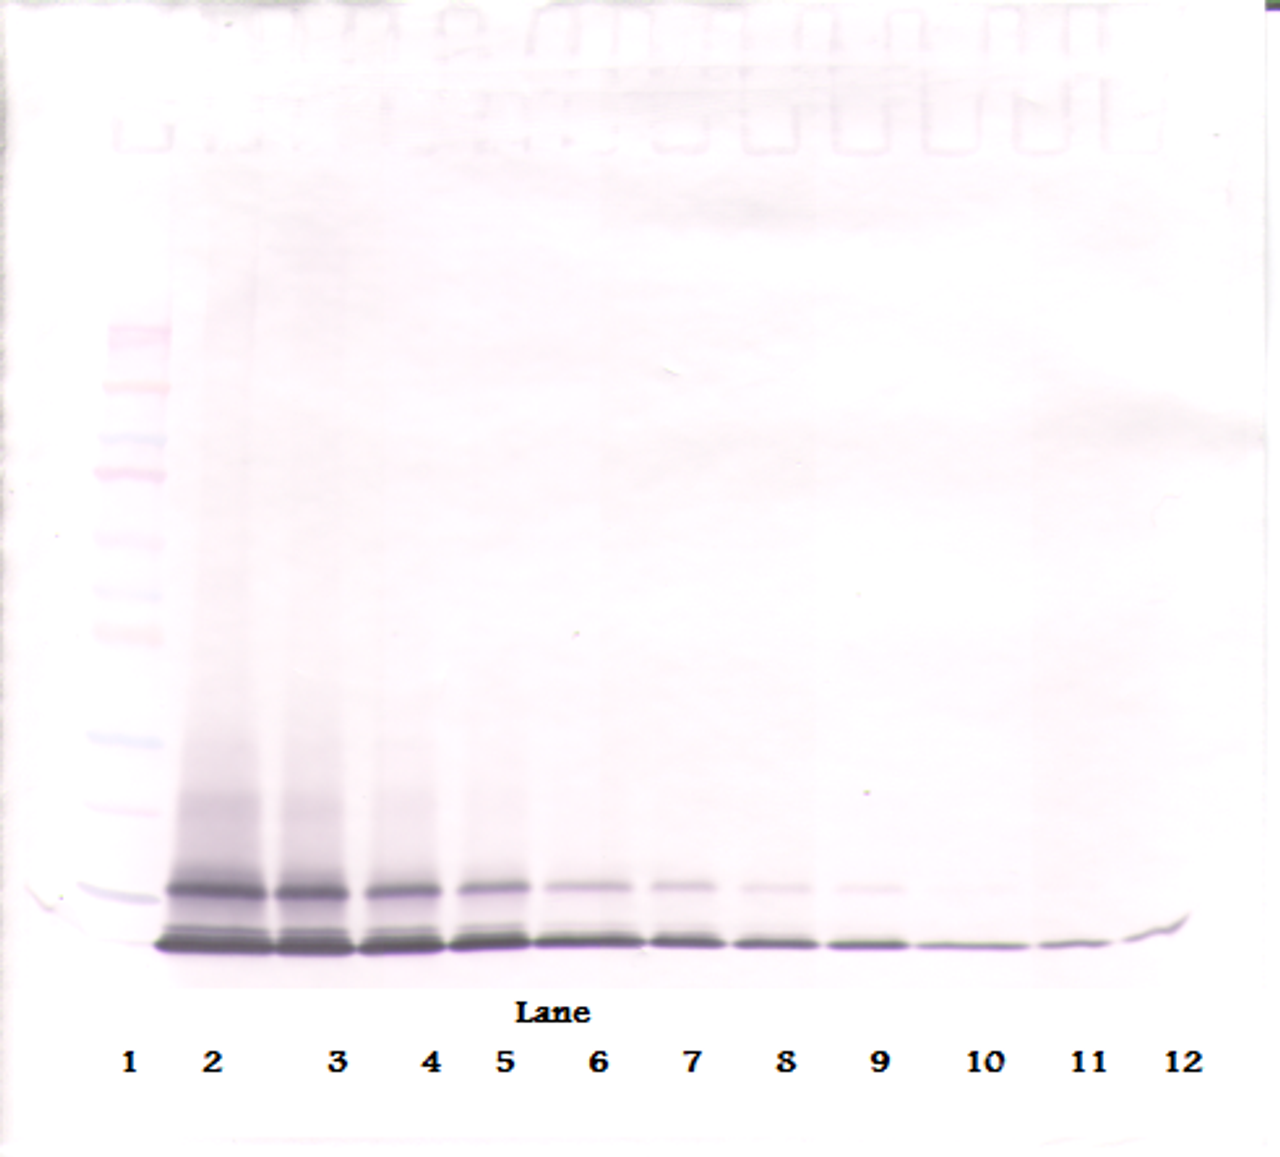 To detect mKC by Western Blot analysis this antibody can be used at a concentration of 0.1-0.2 ug/ml. Used in conjunction with compatible secondary reagents the detection limit for recombinant mKC is 1.5-3.0 ng/lane, under either reducing or non-reducing conditions.